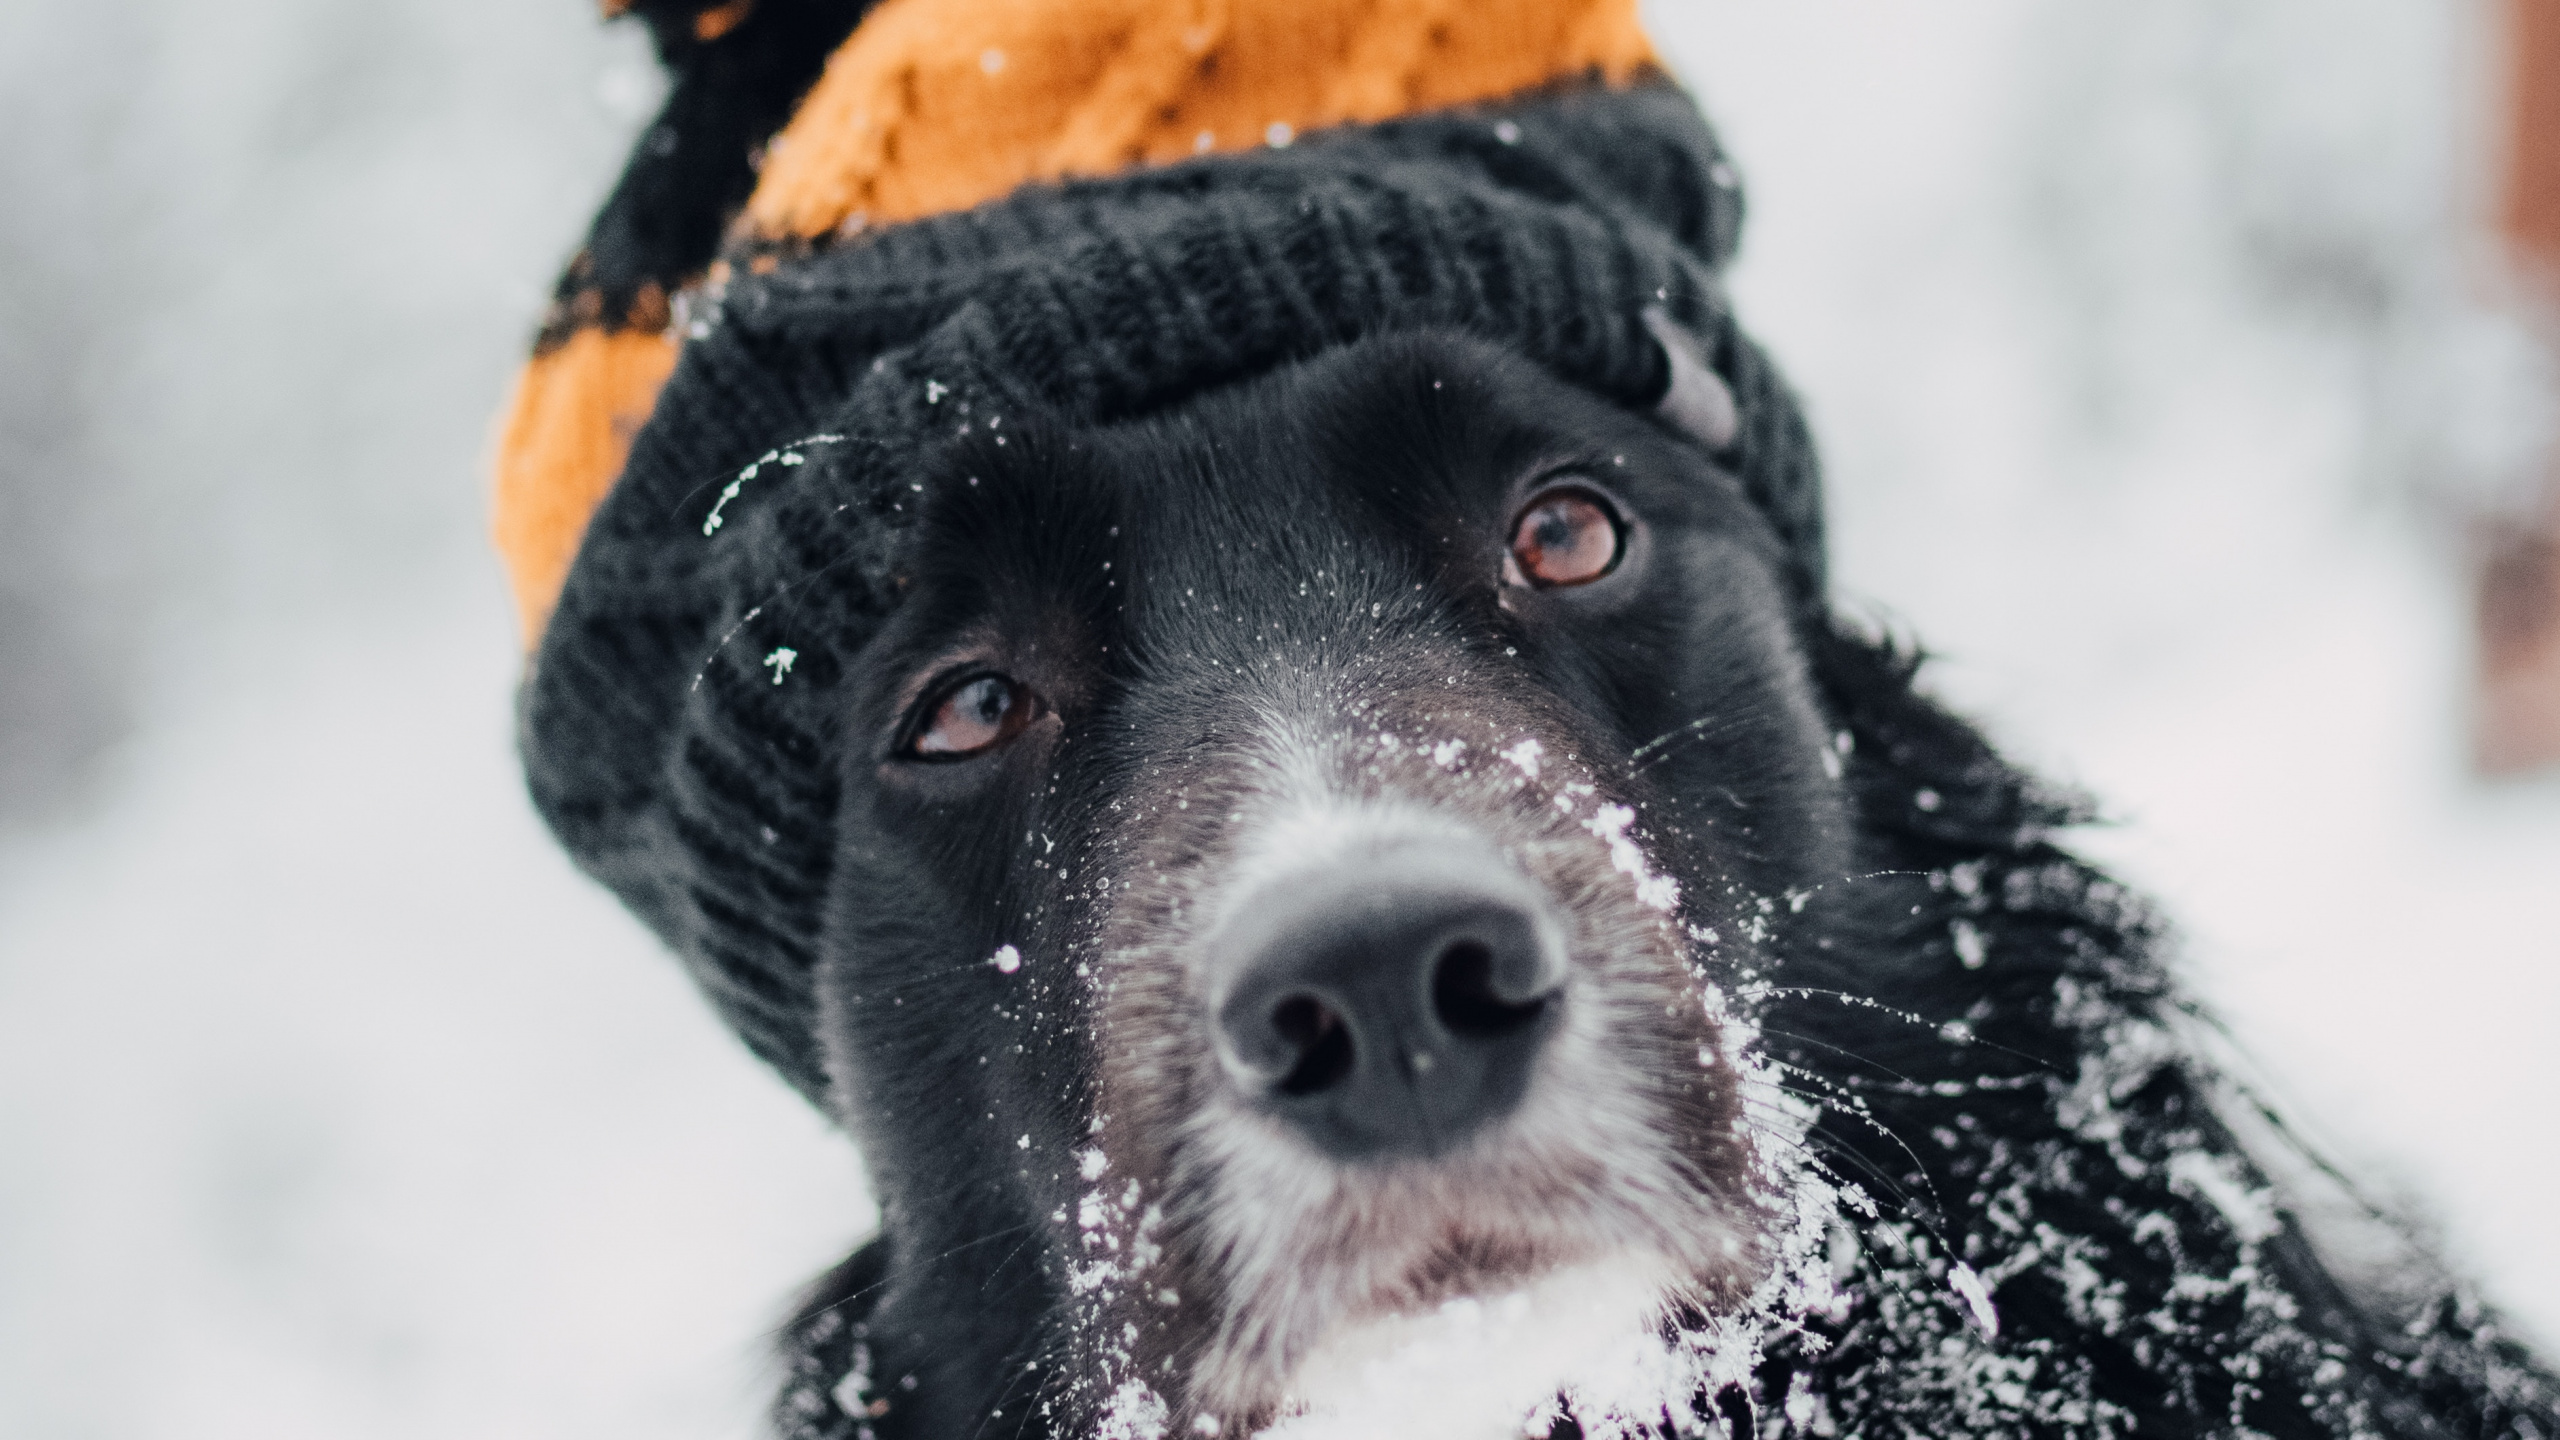 Black and White Border Collie Wearing Orange Knit Cap and Orange Knit Cap. Wallpaper in 2560x1440 Resolution